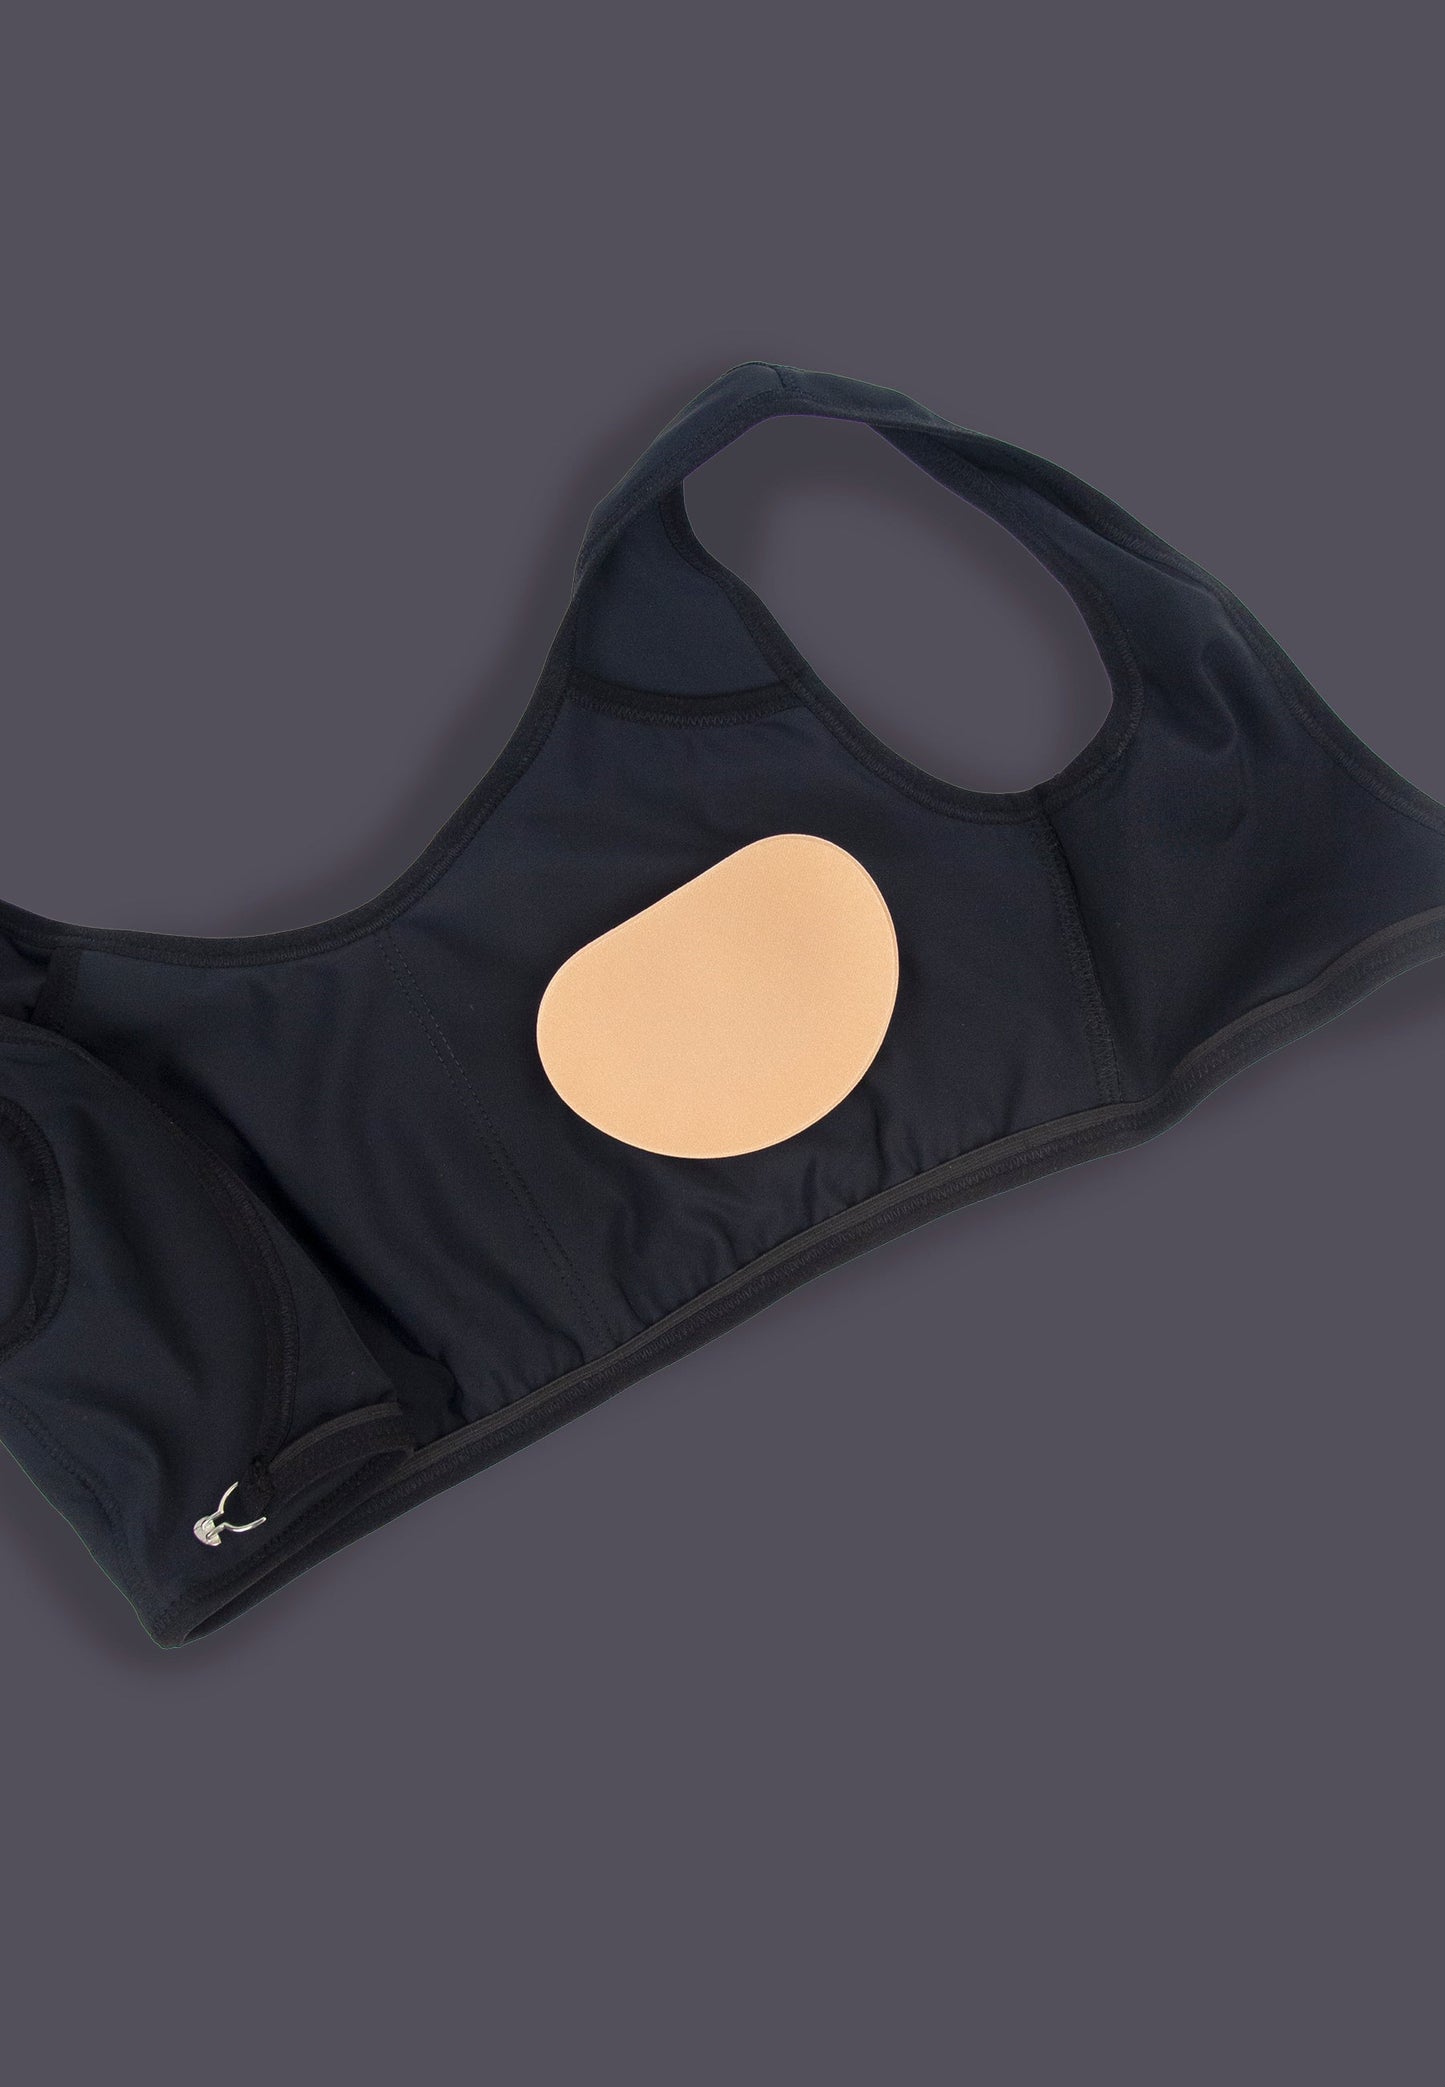 The Foam Self-Adhesive Breastpads inside the top